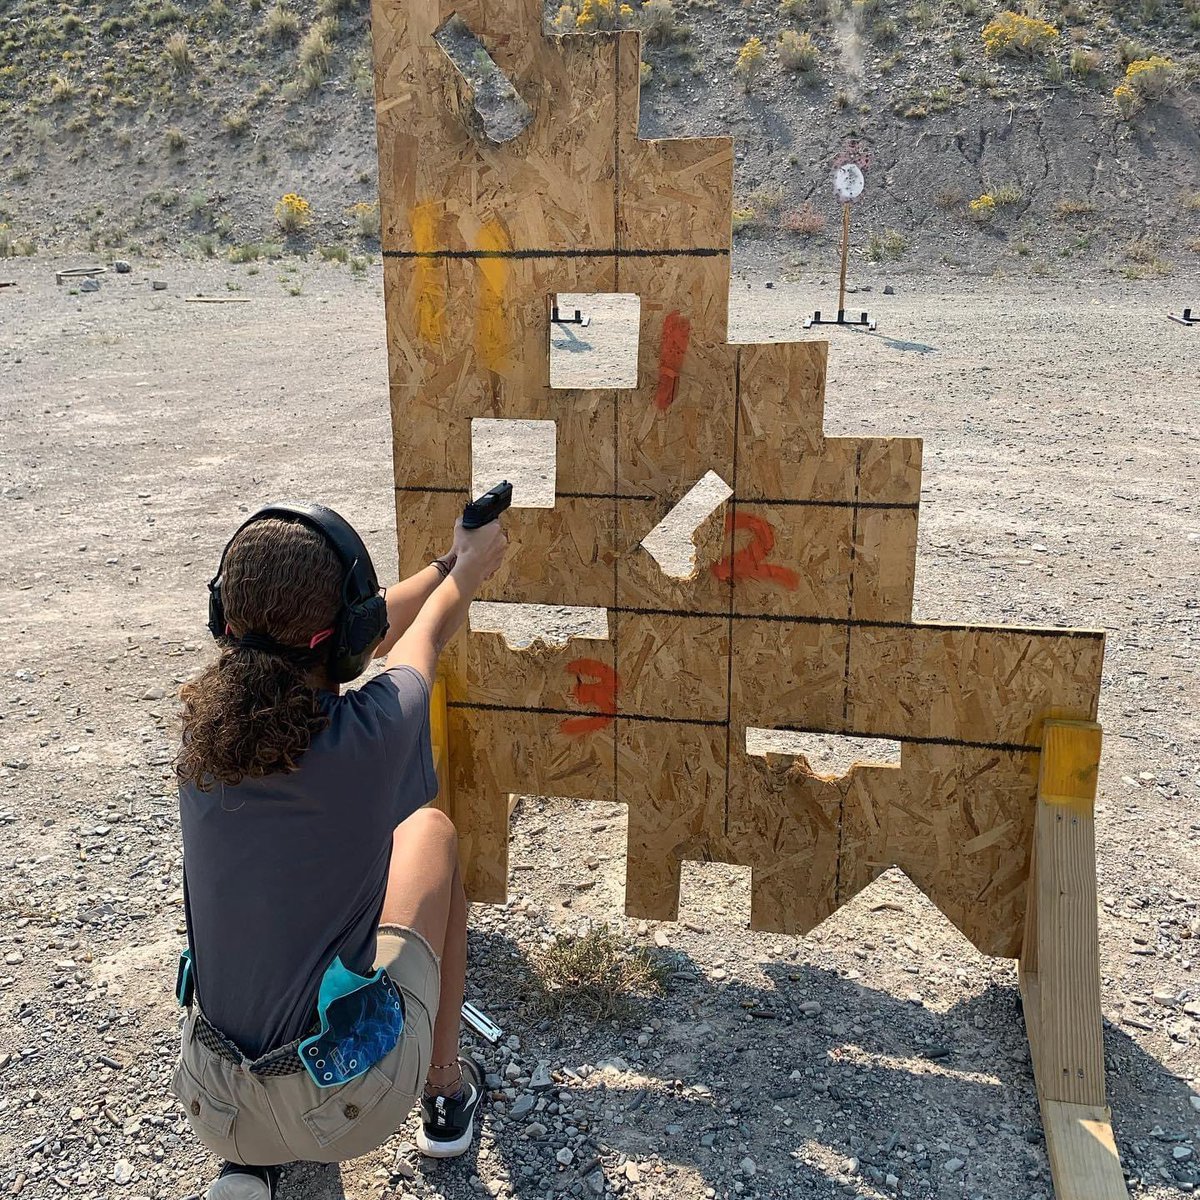 Evil never makes an appointment. My sons and daughters will have the tools and training to protect themselves. #secondammendment #Glock #shewillwreckyourday